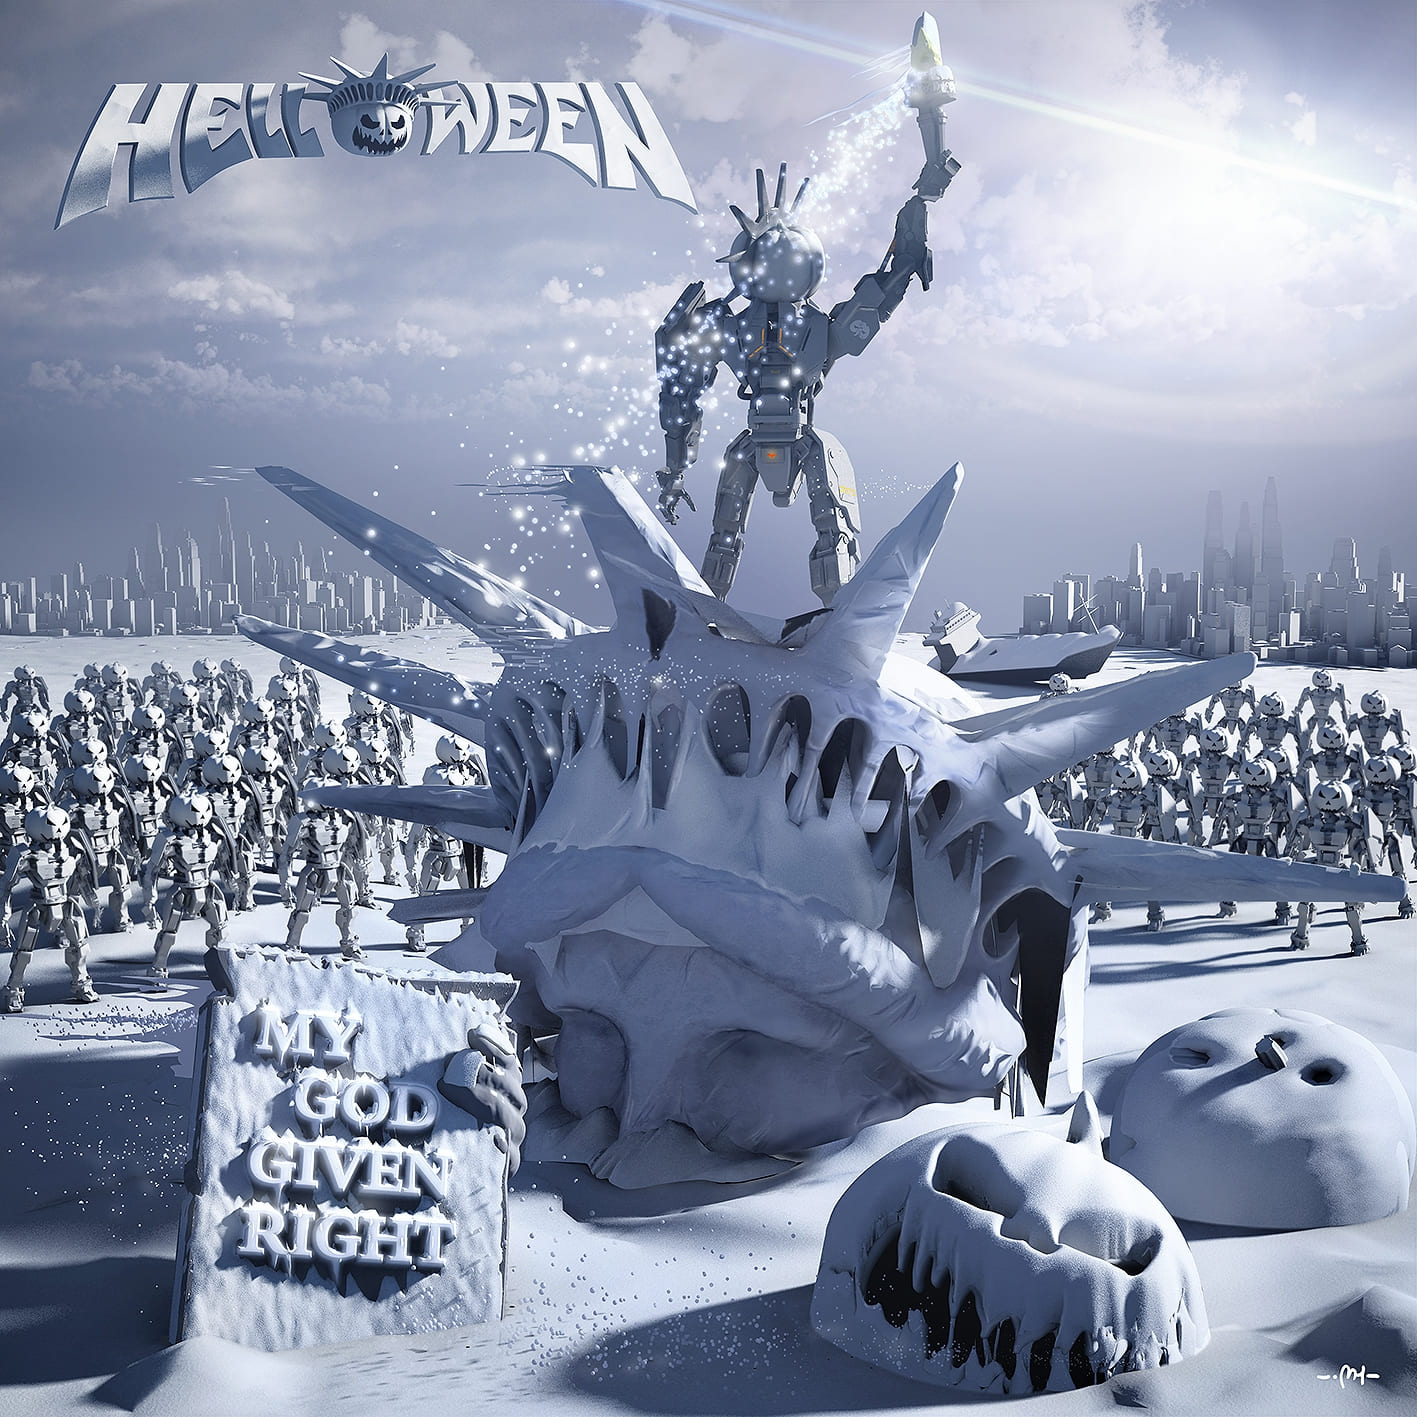 Металл Atomic Fire Helloween - My God-Given Right (180 Gram Clear/Black Marbled Vinyl 2LP) two trees all metal geared extruder right cloned dual drive extruder silver